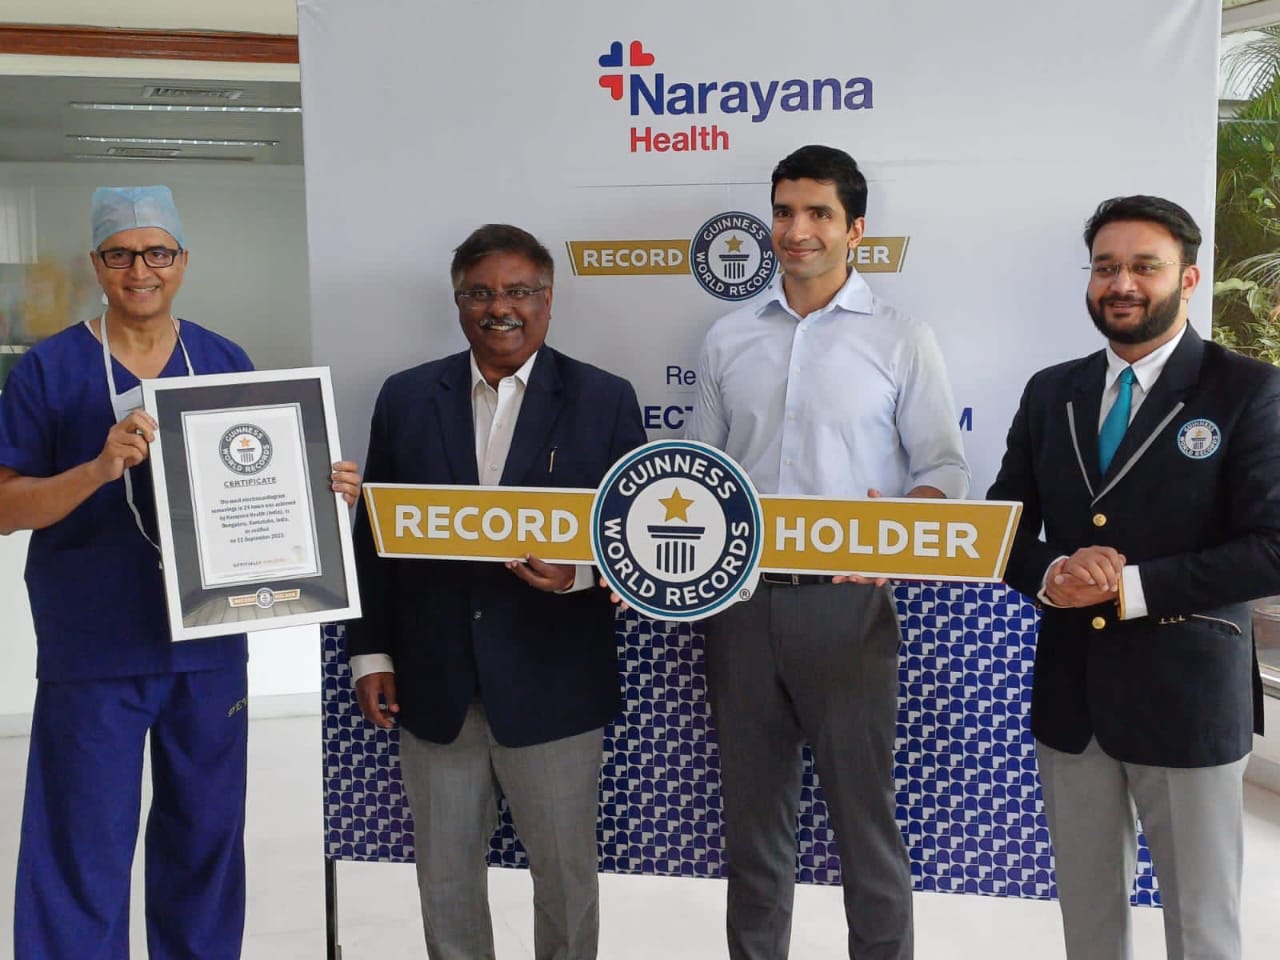 Narayana Health sets Guinness World Record with ECGs - Healthcare